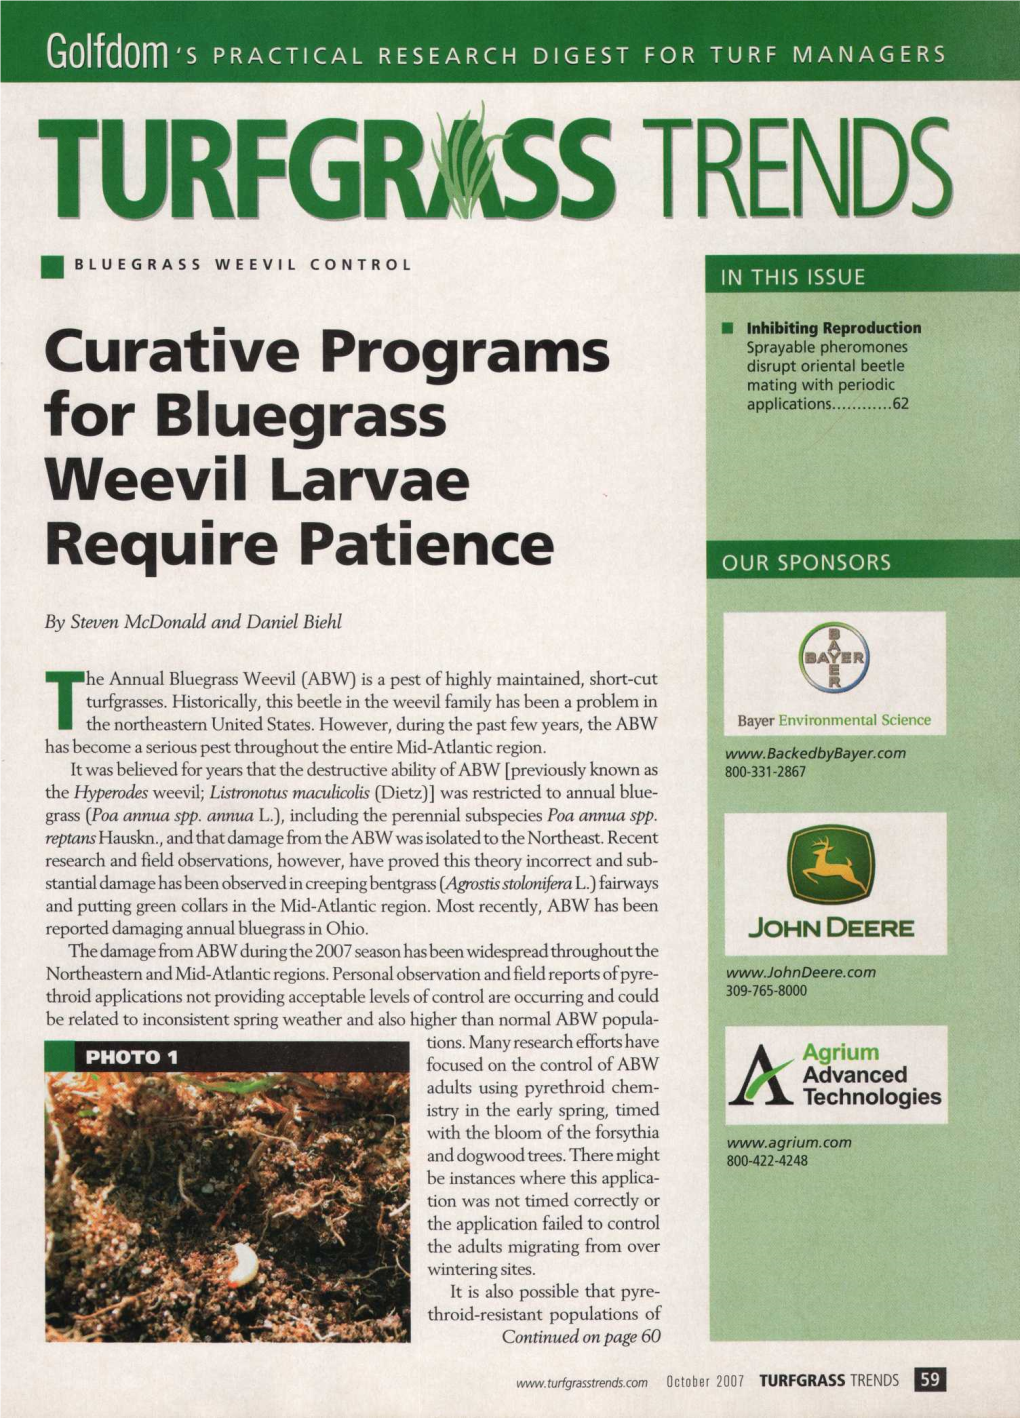 Curative Programs for Bluegrass Weevil Larvae Require Patience